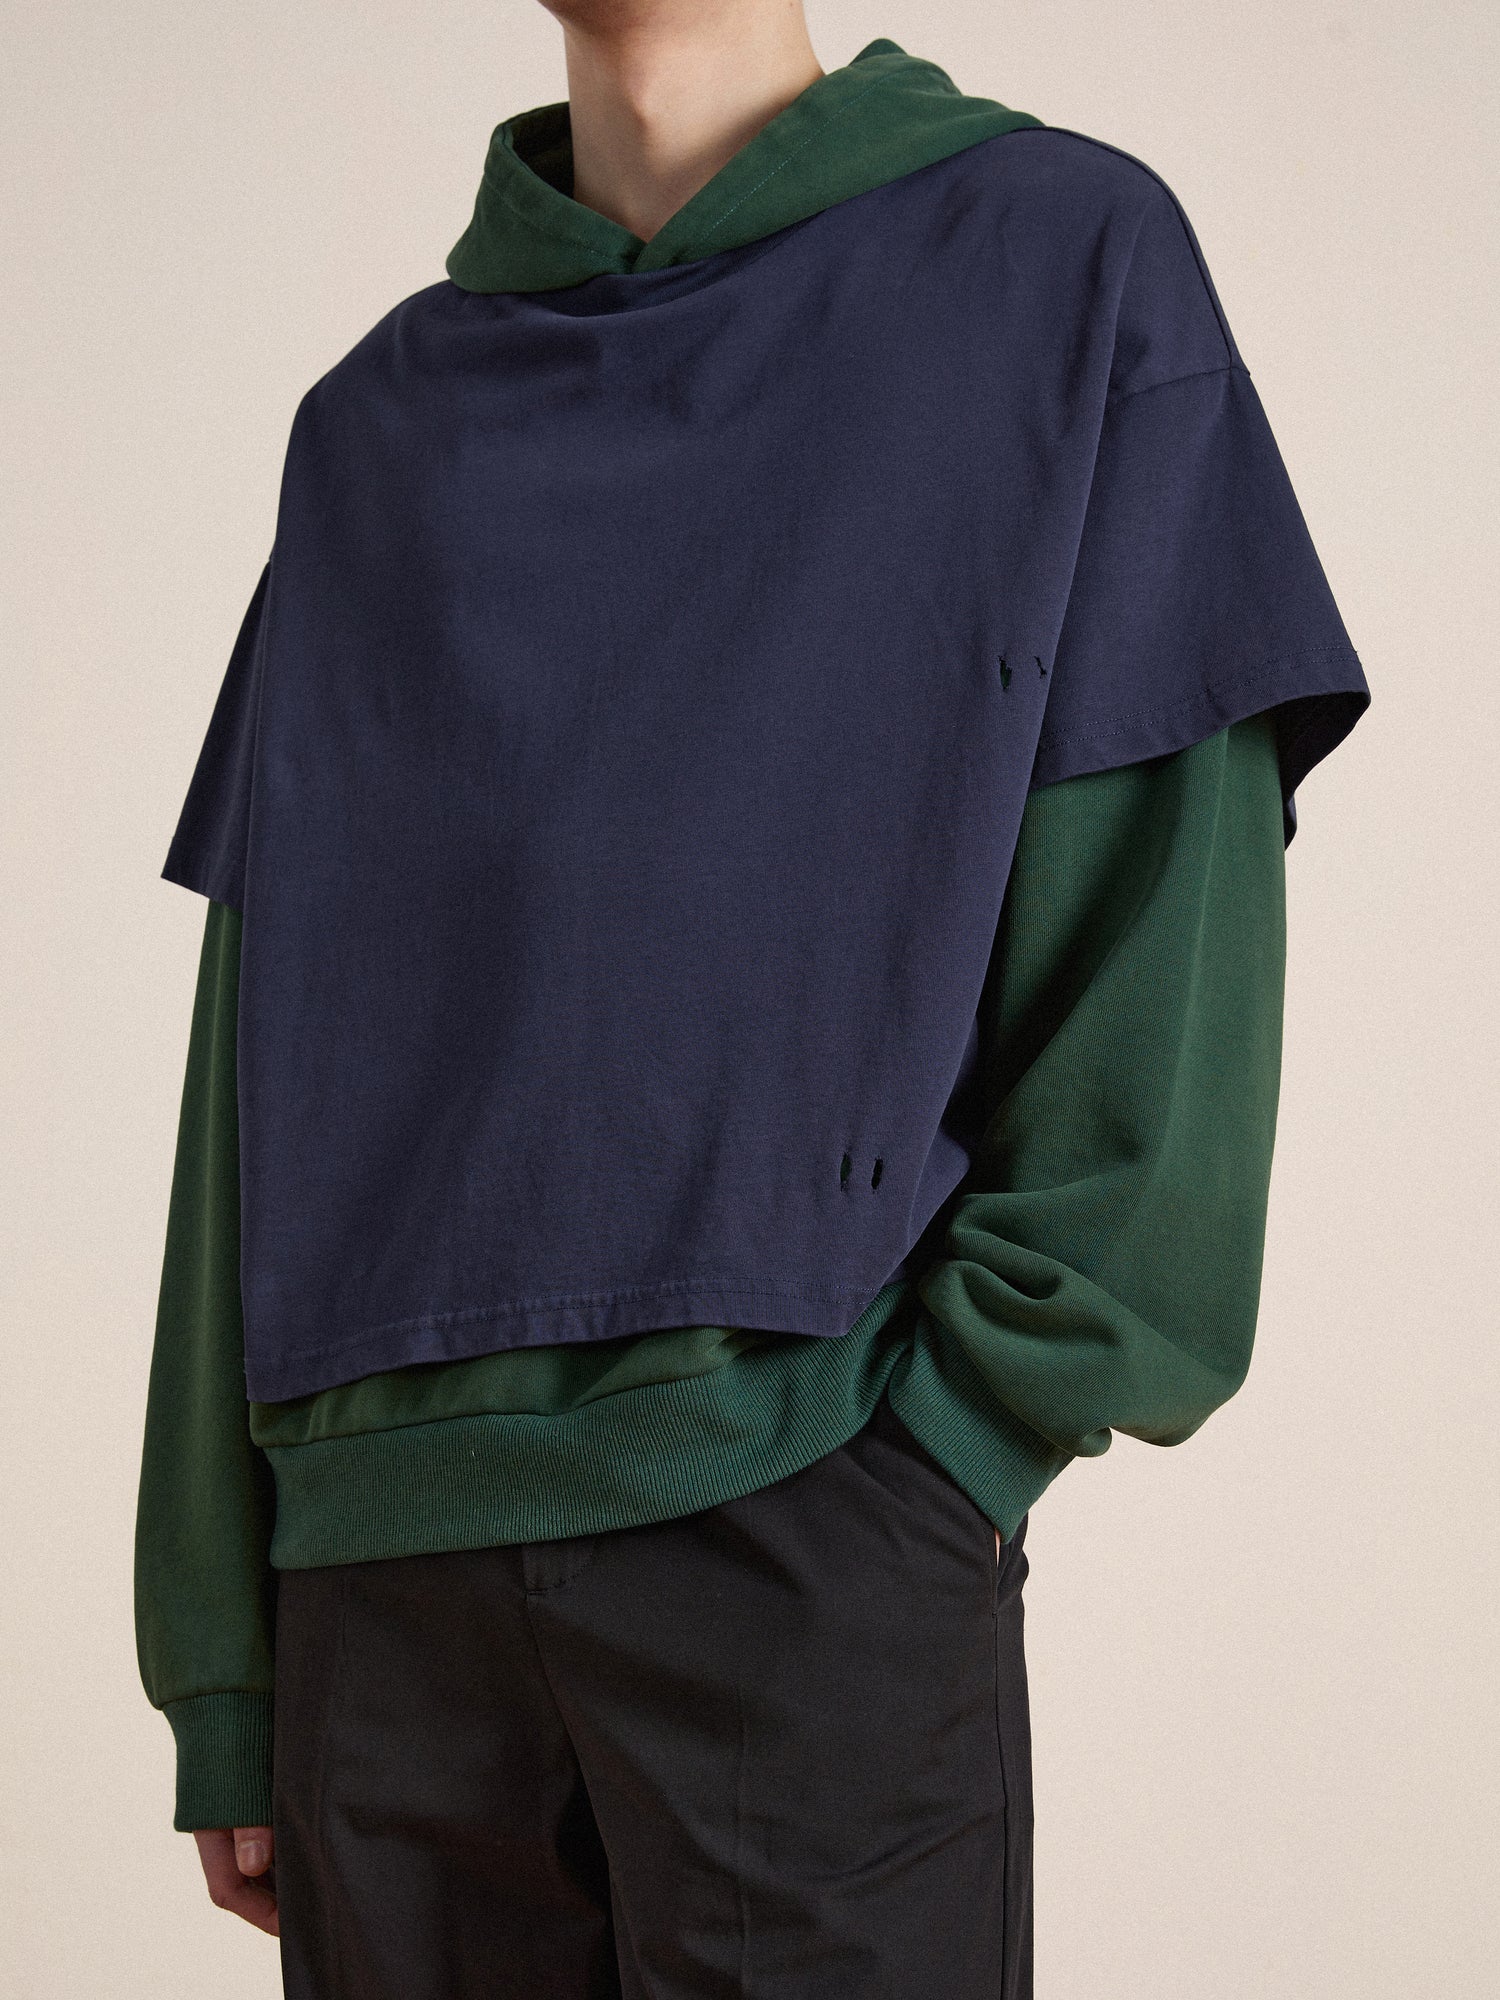 A man wearing a navy Found Double Layer Hoodie and green hoodie.